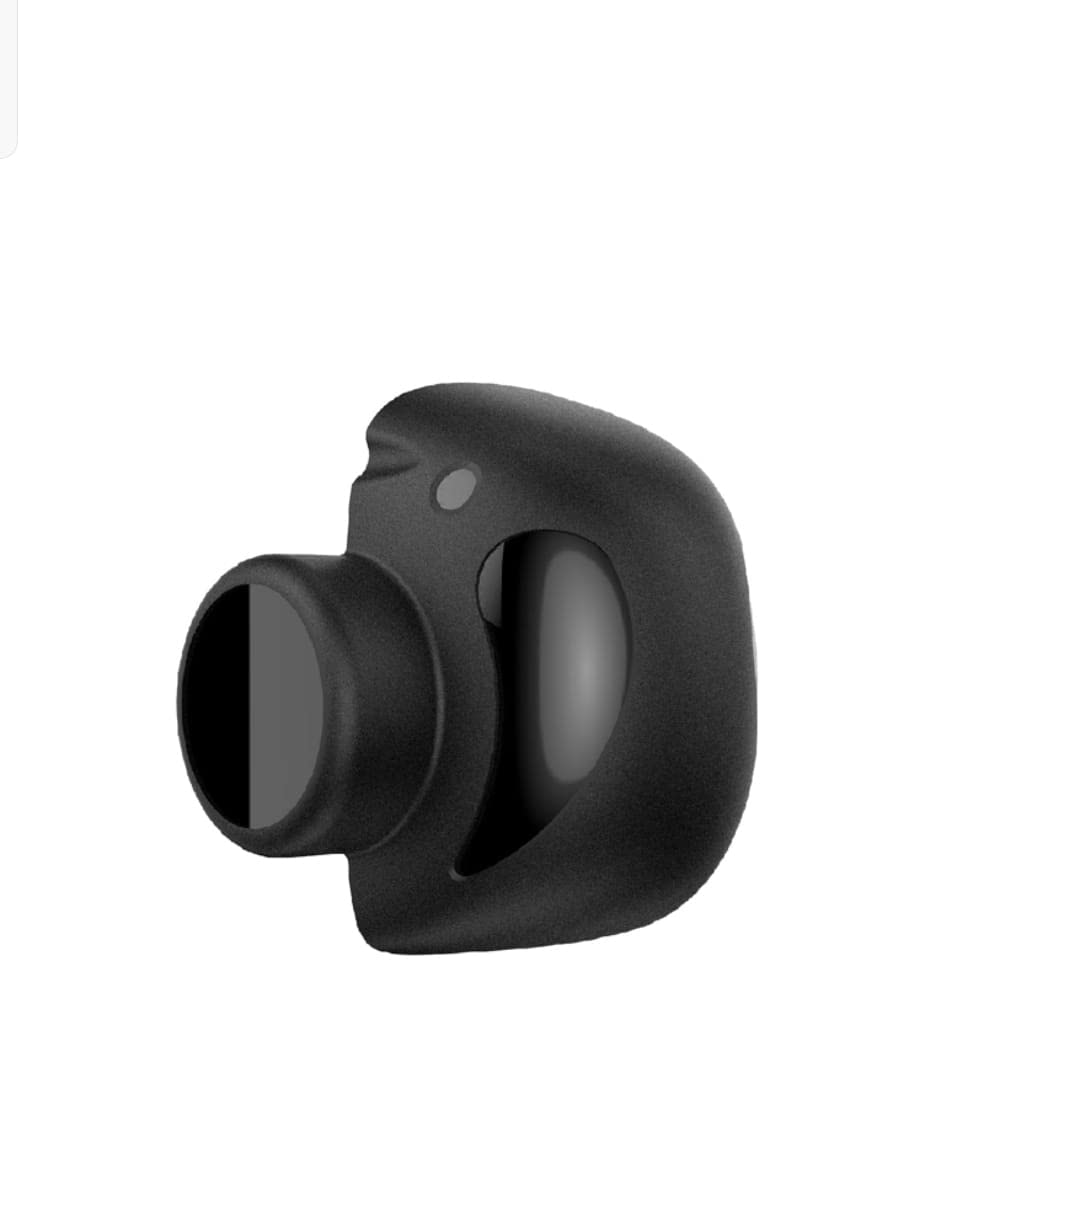 Lens Cap for DJI FPV Gimbal Protective Cover Cap Accessories GetZget